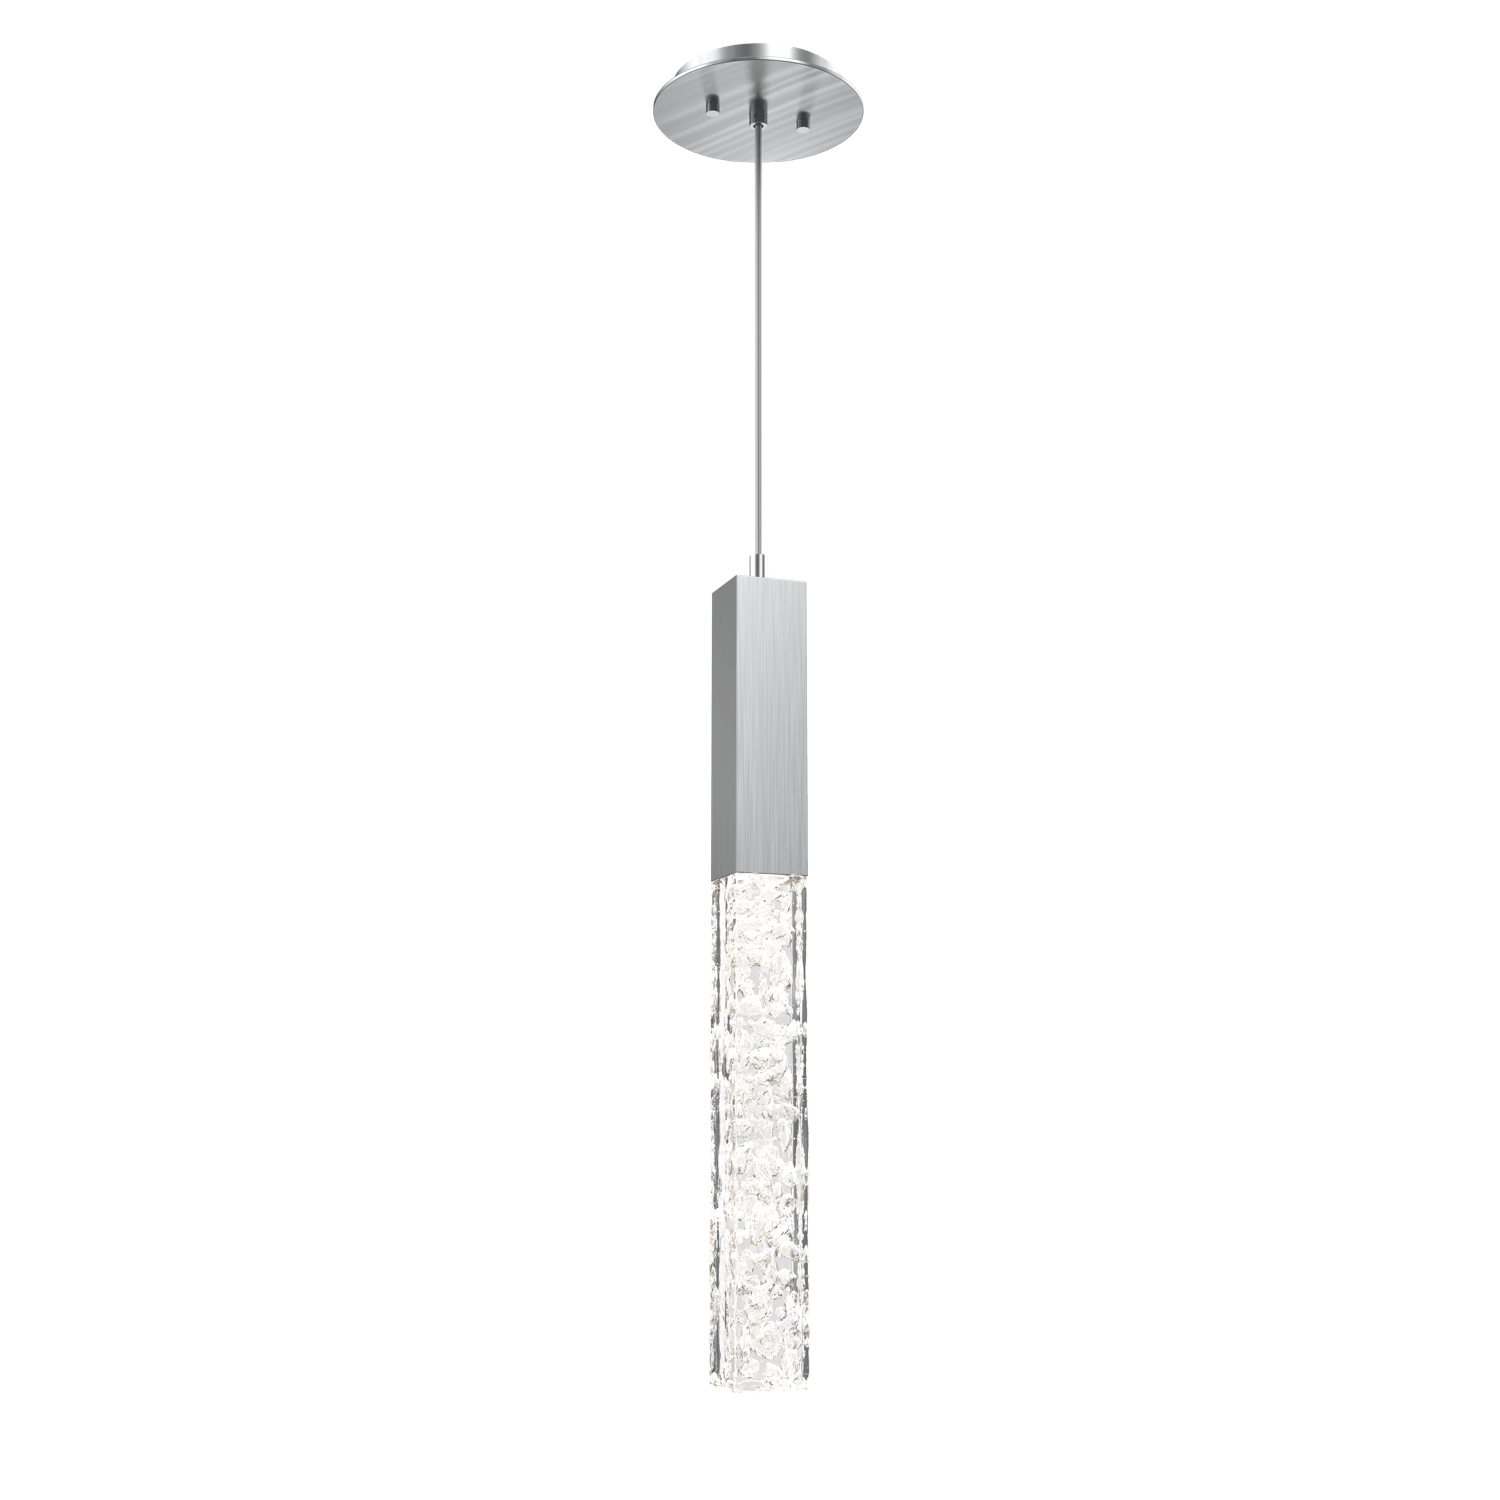 LAB0060-01-SN-GC-Hammerton-Studio-Axis-Pendant-Light-with-Satin-Nickel-finish-and-clear-cast-glass-and-LED-lamping